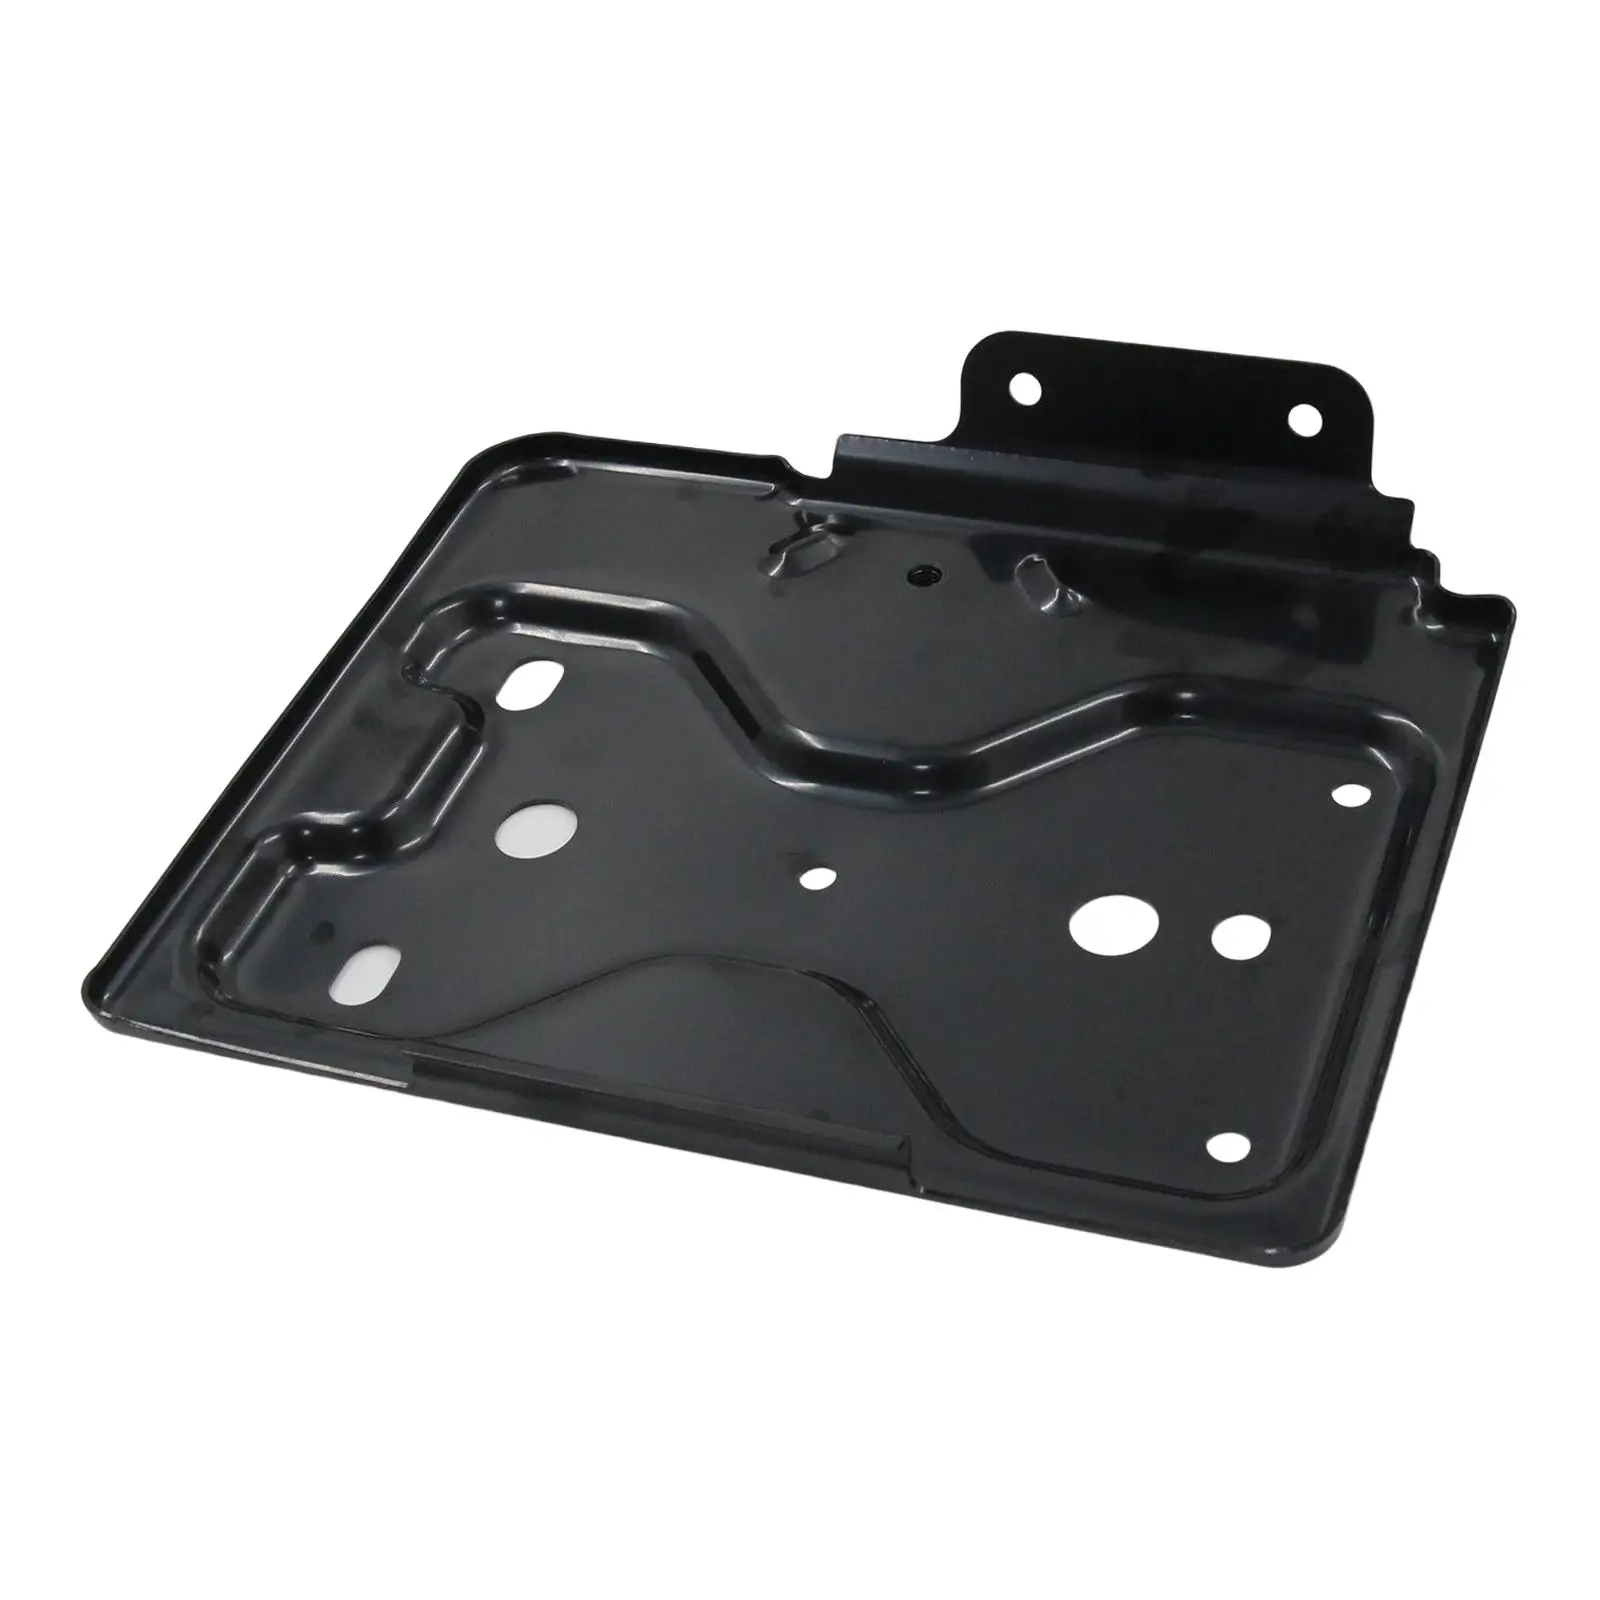 Driver Side Battery Tray/ Car Accessories/ Premium, Durable, High Performance, Replaces Spare Parts for 1500